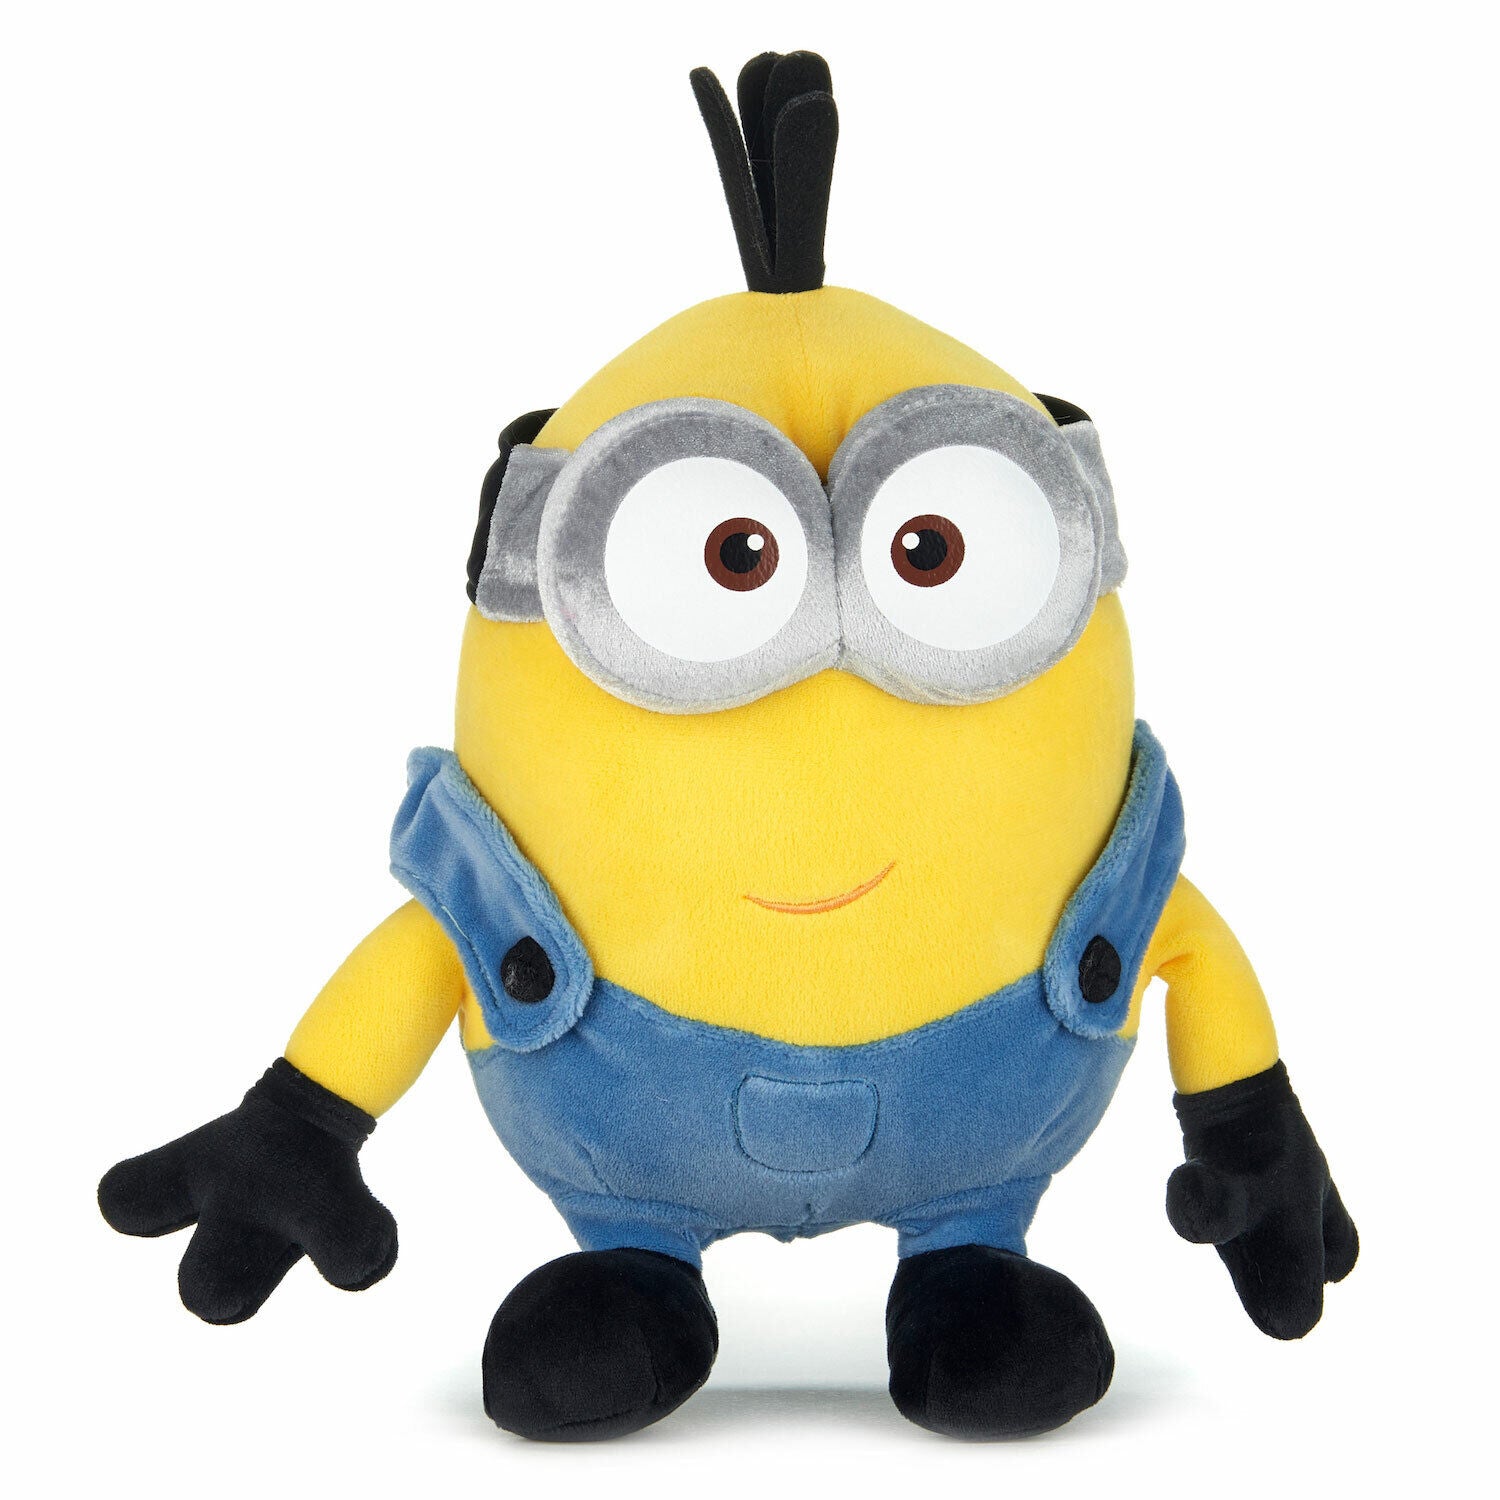 New Minions The Rise of Gru 10-Inch Cuddly Kevin Plush Toy